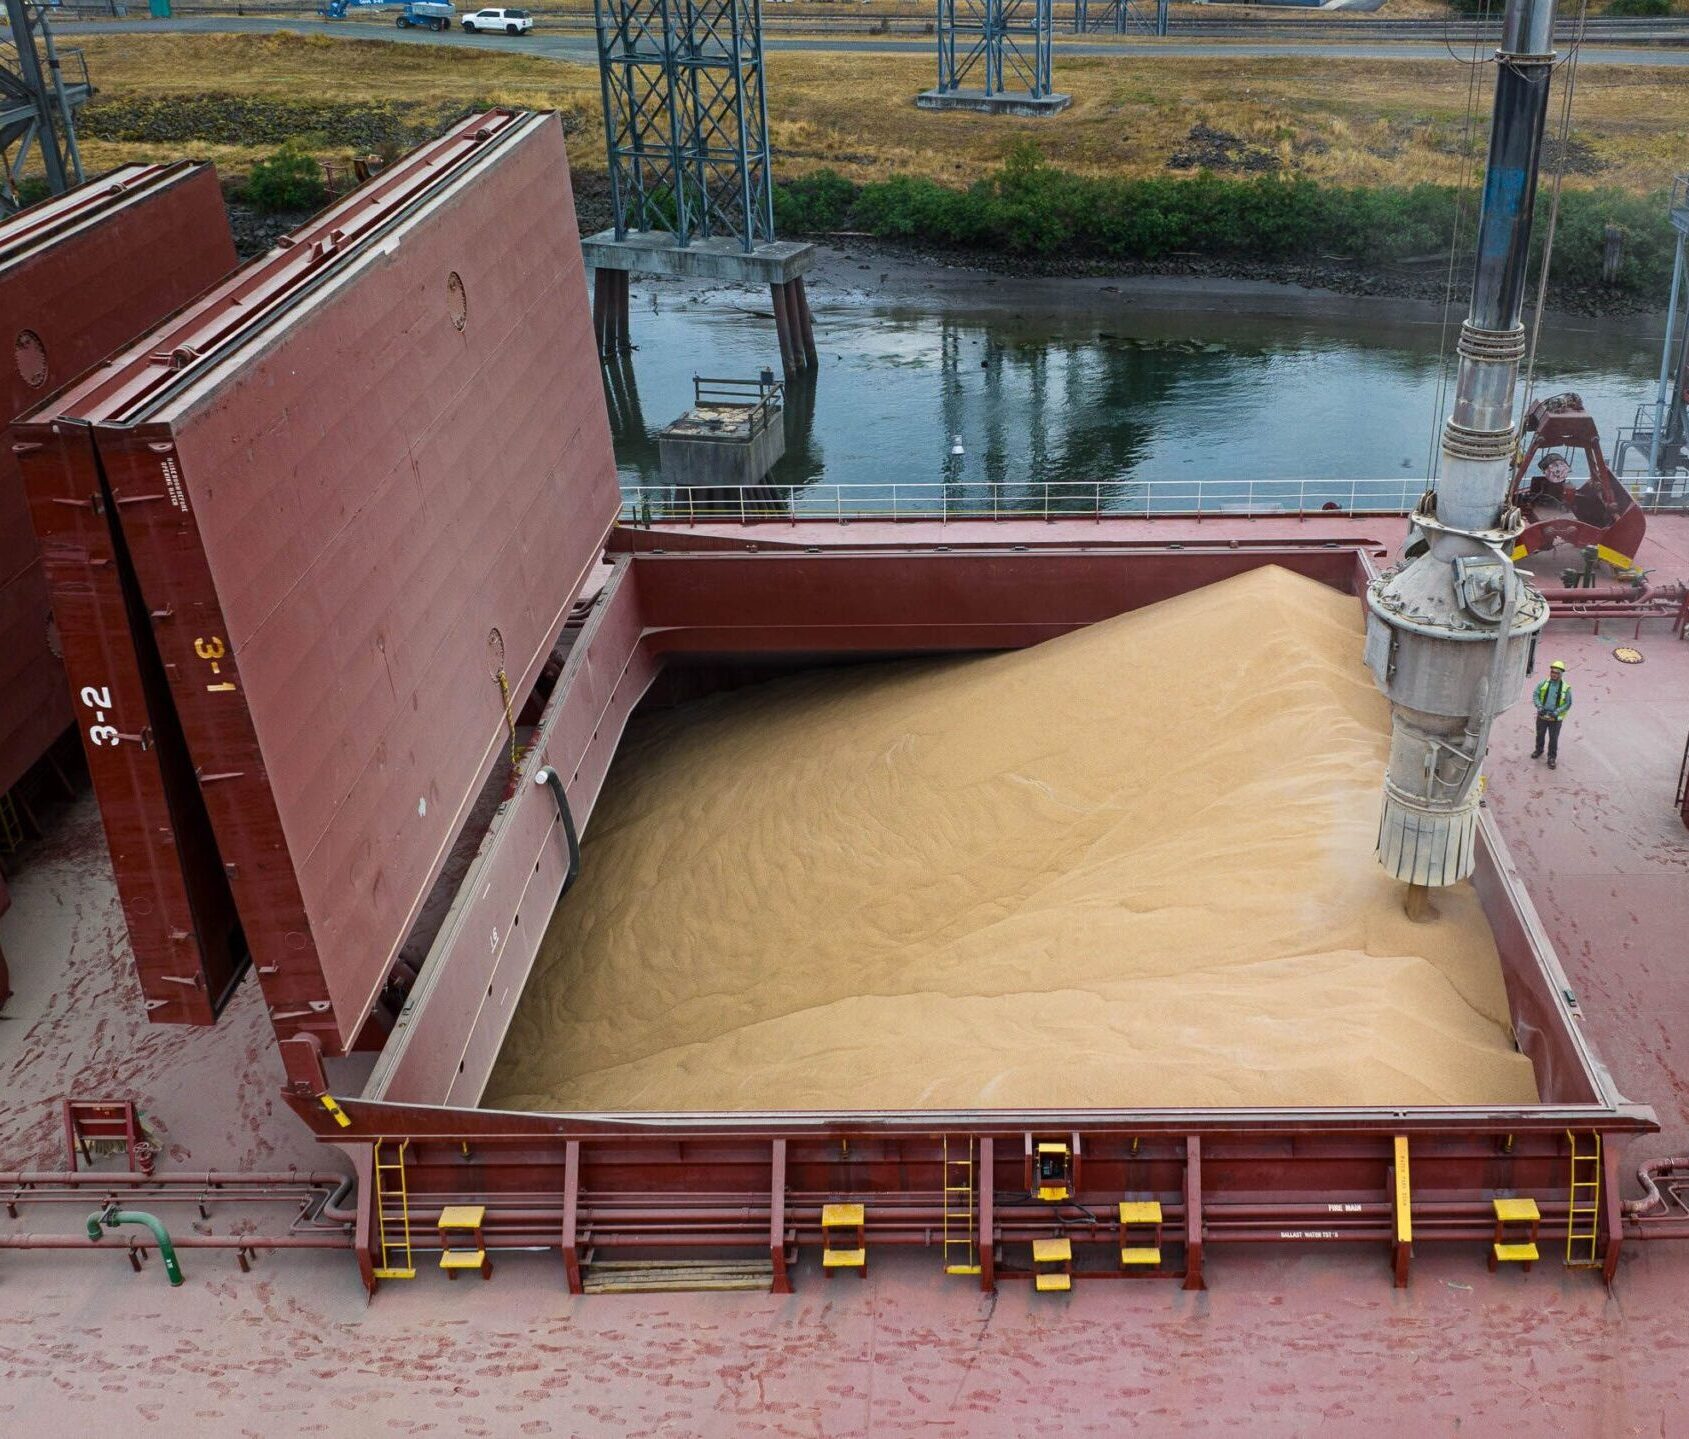 American-grown grain is loaded into the Liberty Glory's hold.